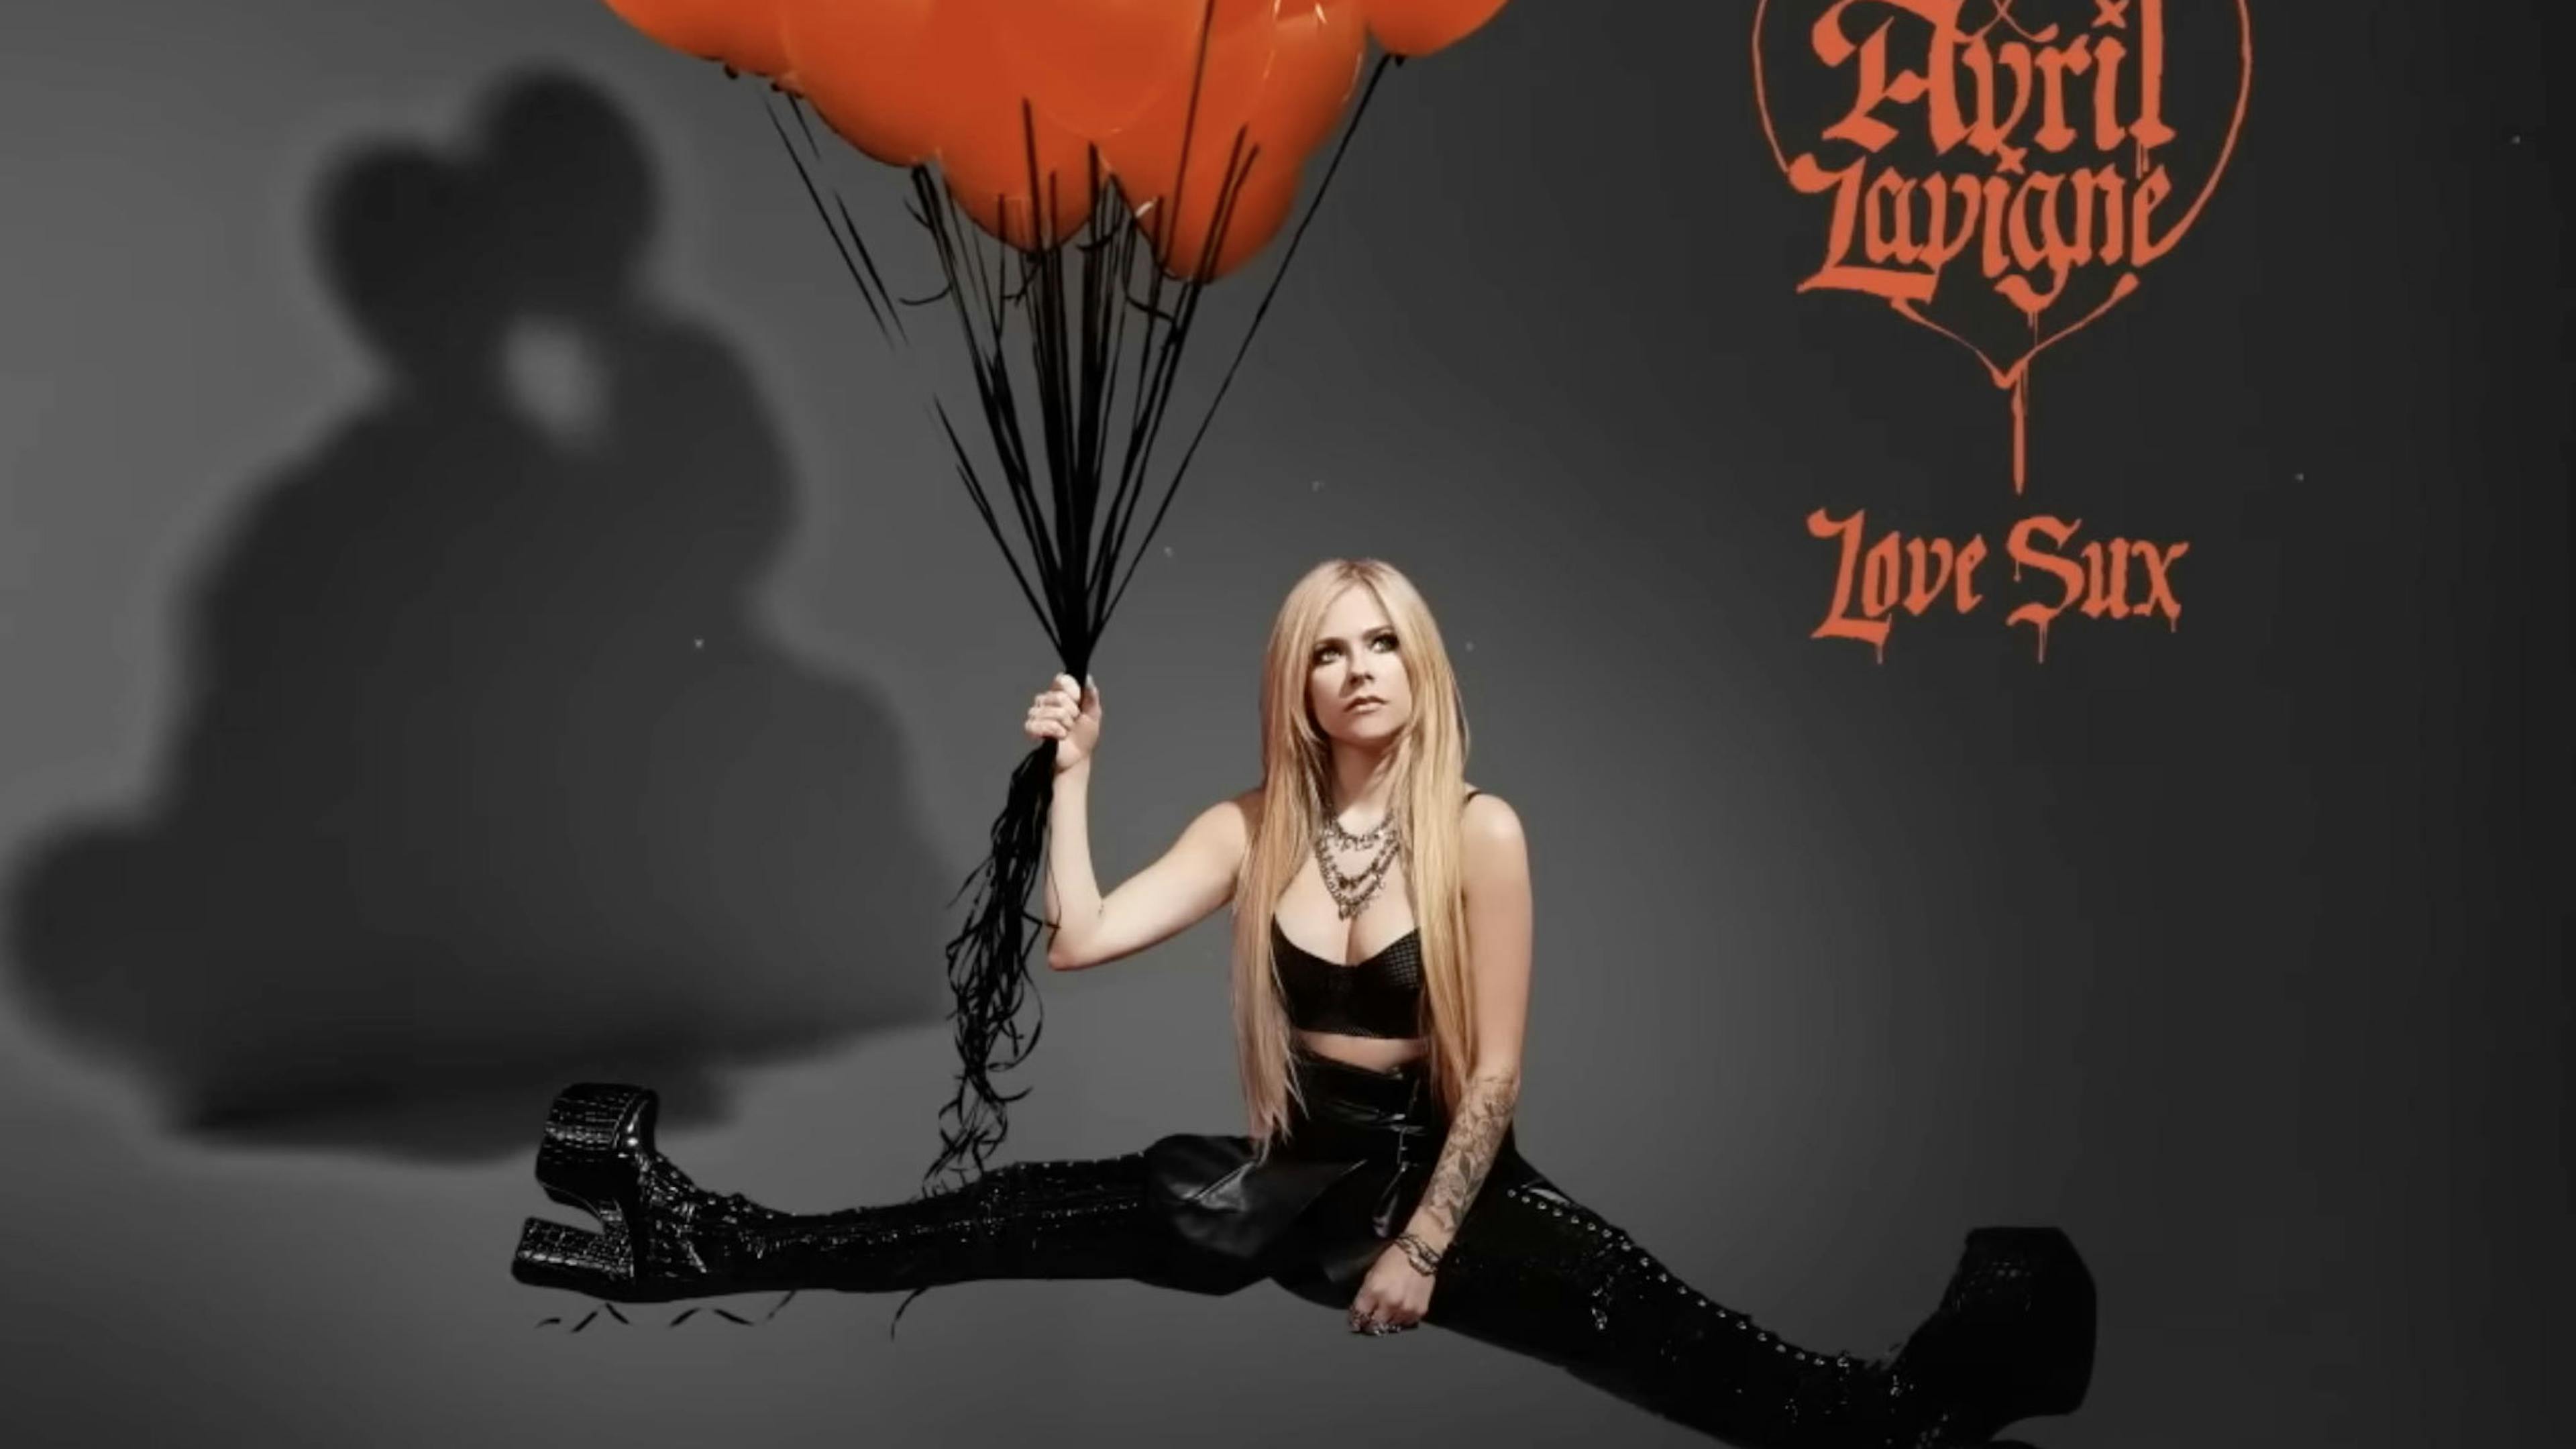 Avril Lavigne shares Love Sux deluxe edition featuring new songs